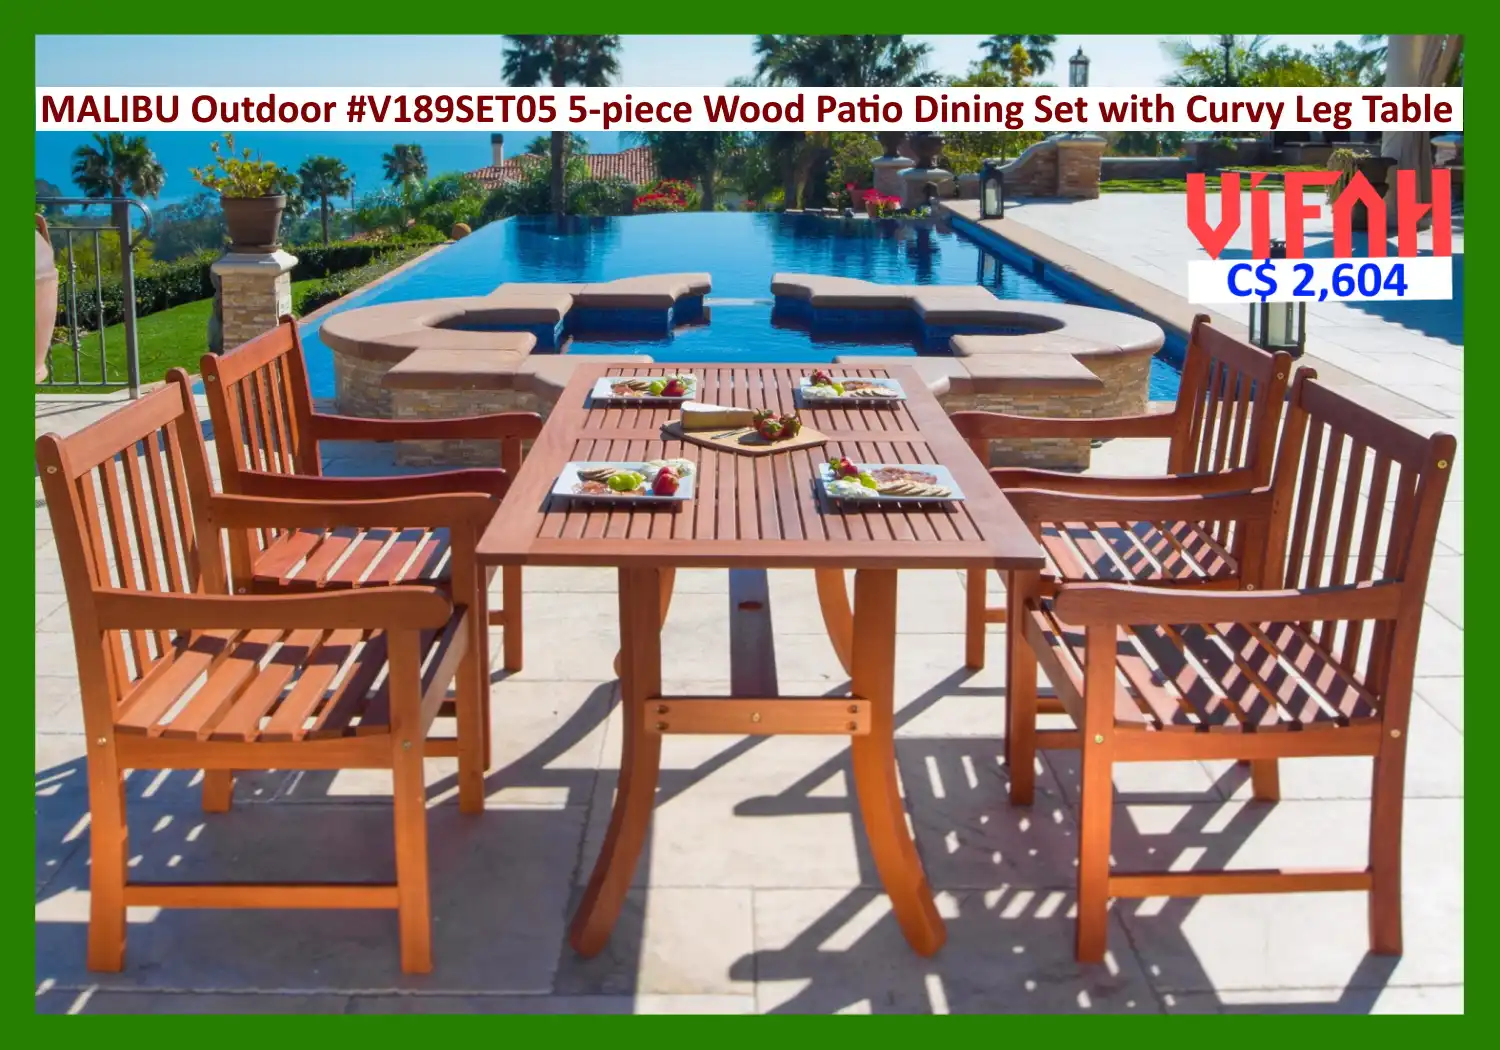 MALIBU Outdoor #V189SET07 7-piece Wood Patio Dining Set with Curvy Leg Table & Folding Chairs